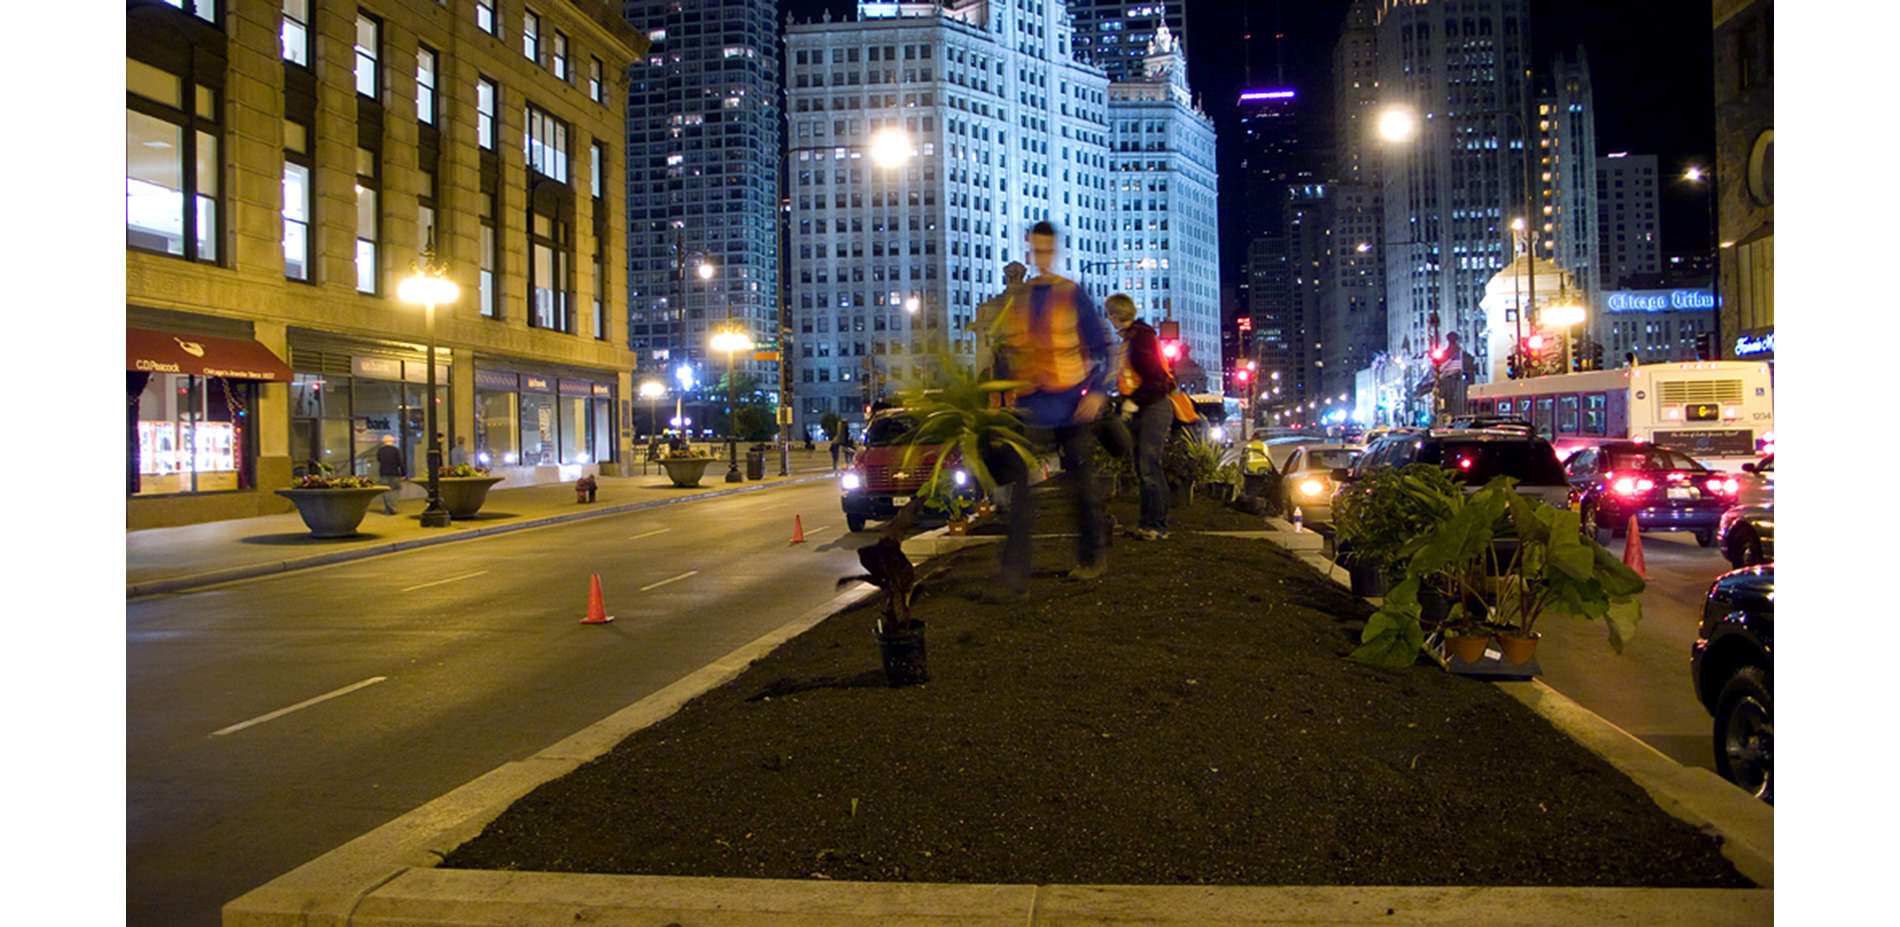 Michigan Avenue Streetscape: 20 Years of Magnificent Mile Blooms